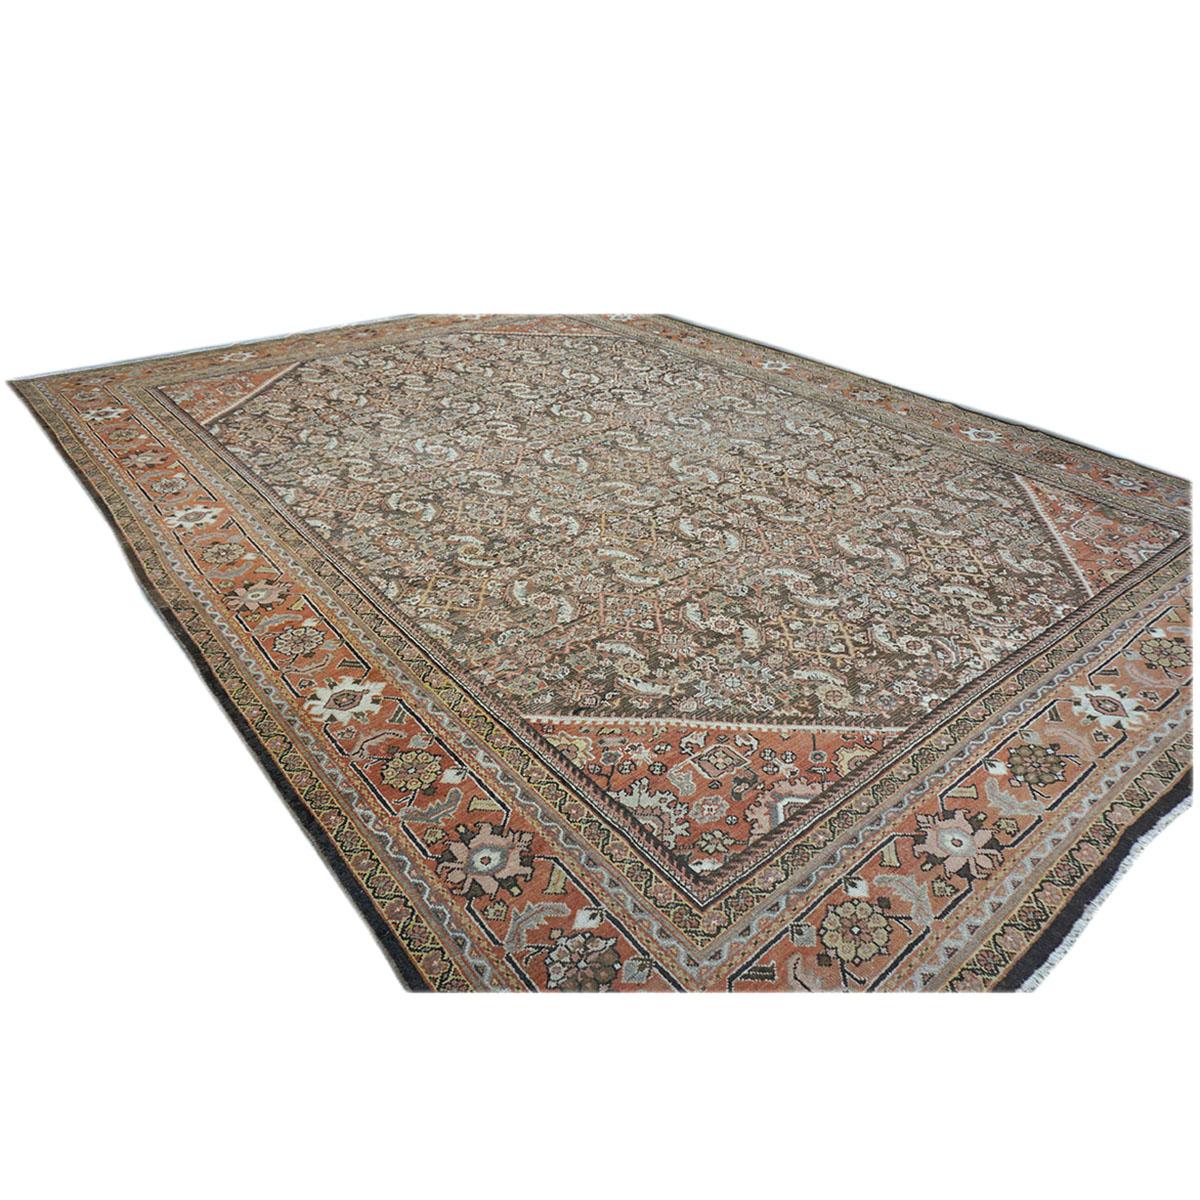 20th Century Antique Persian Sultanabad 10x14 Brown & Rust Handmade Area Rug In Good Condition For Sale In Houston, TX